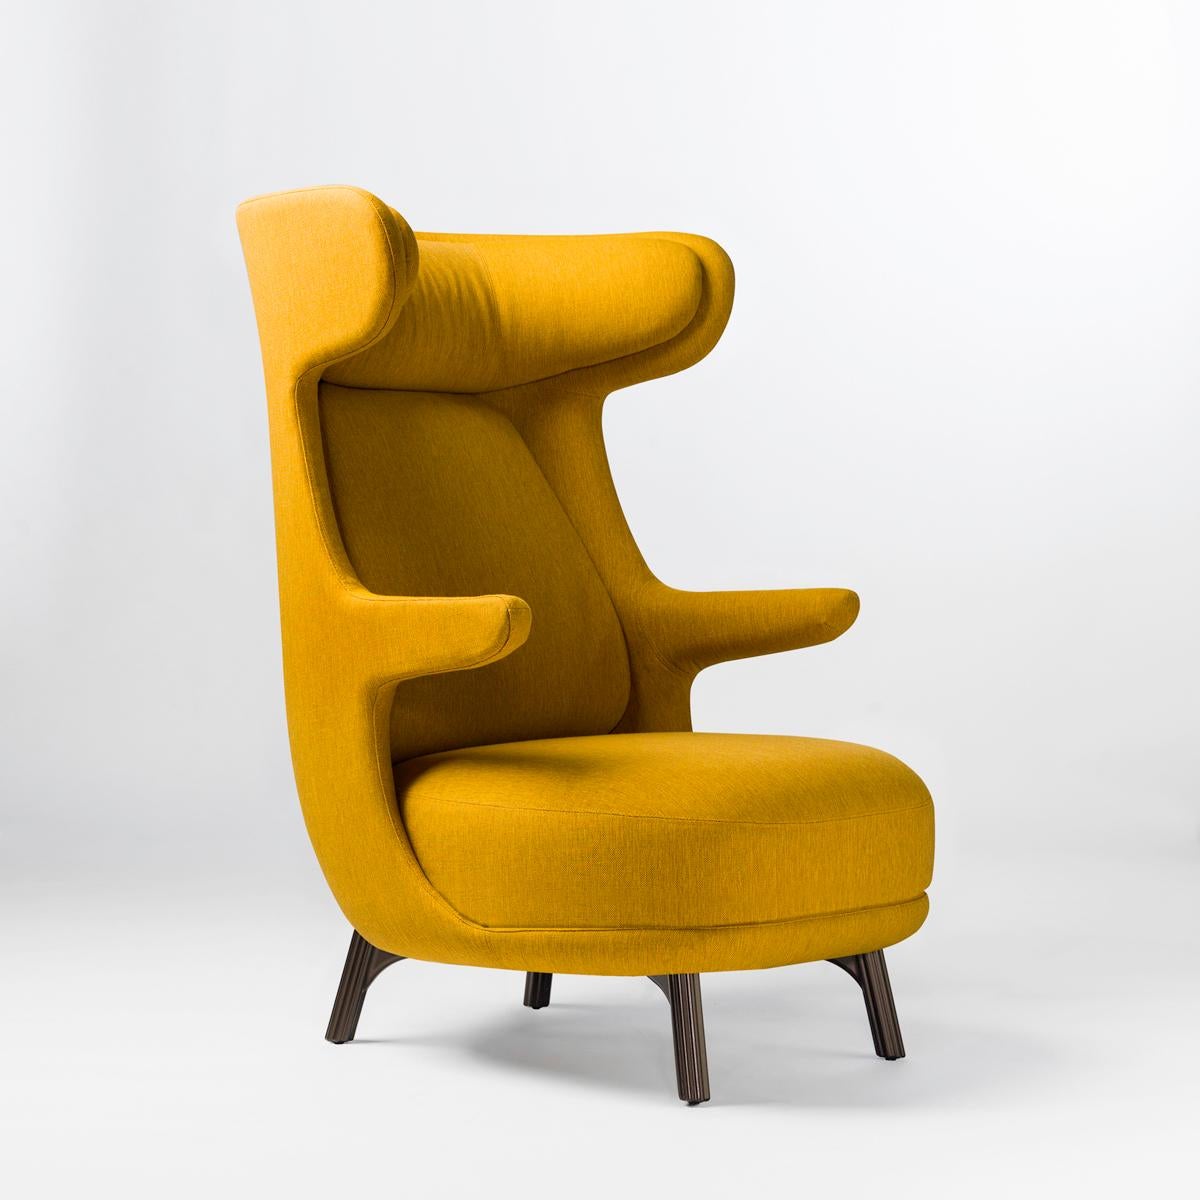 Aluminum Jaime Hayon, Contemporary, Monocolor in Yellow Fabric Upholstery Dino Armchair